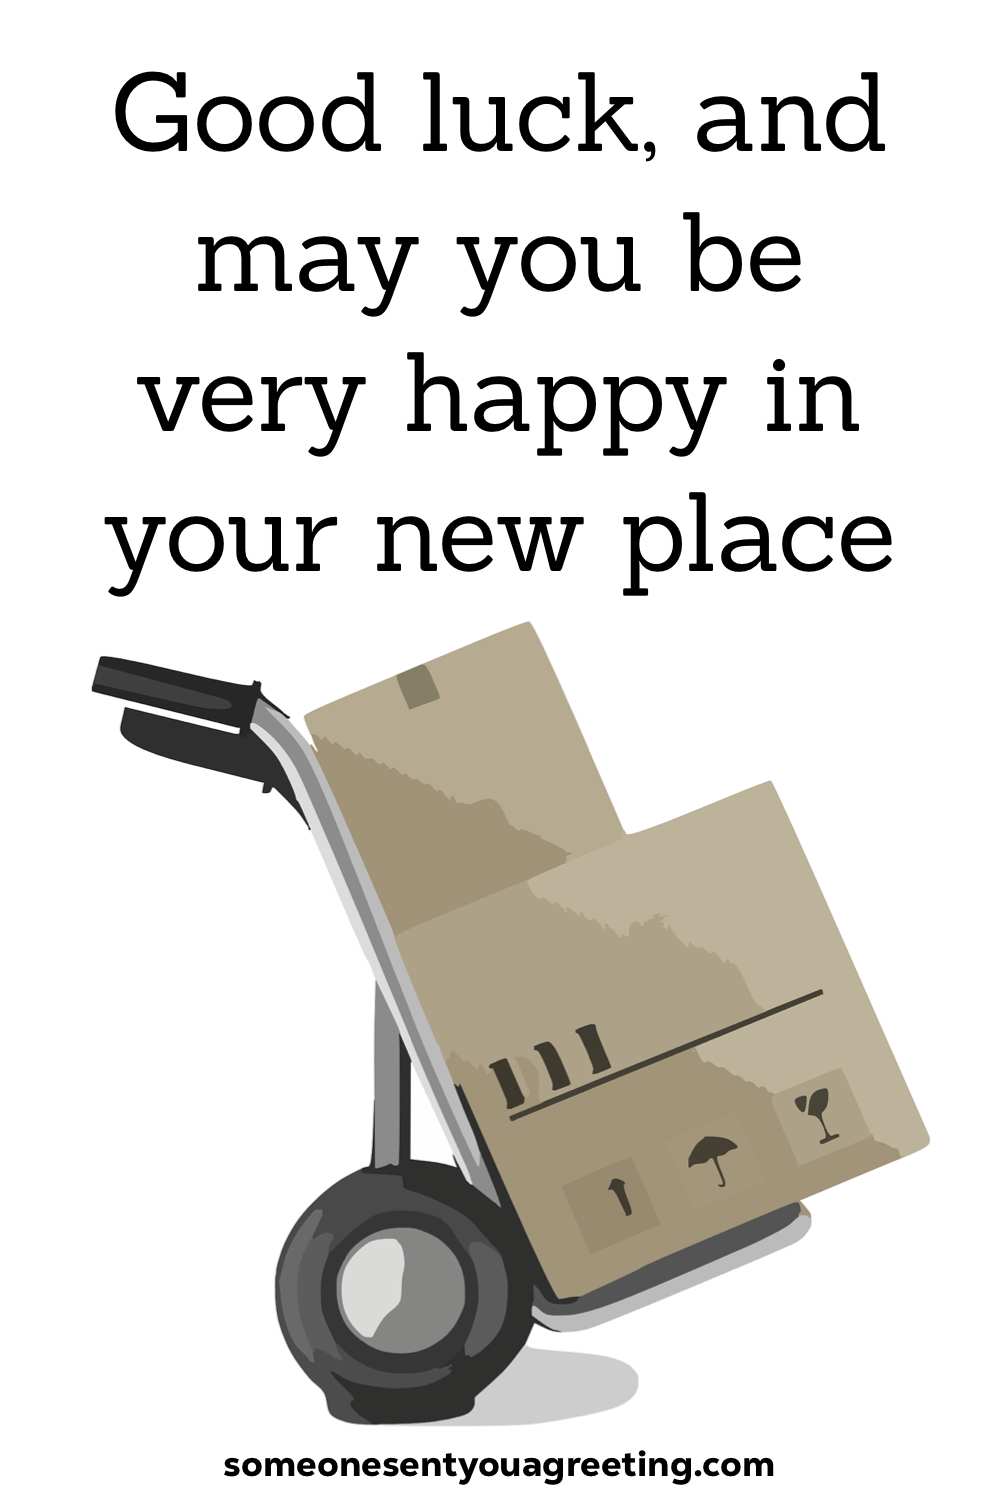 good luck for your new place wishes